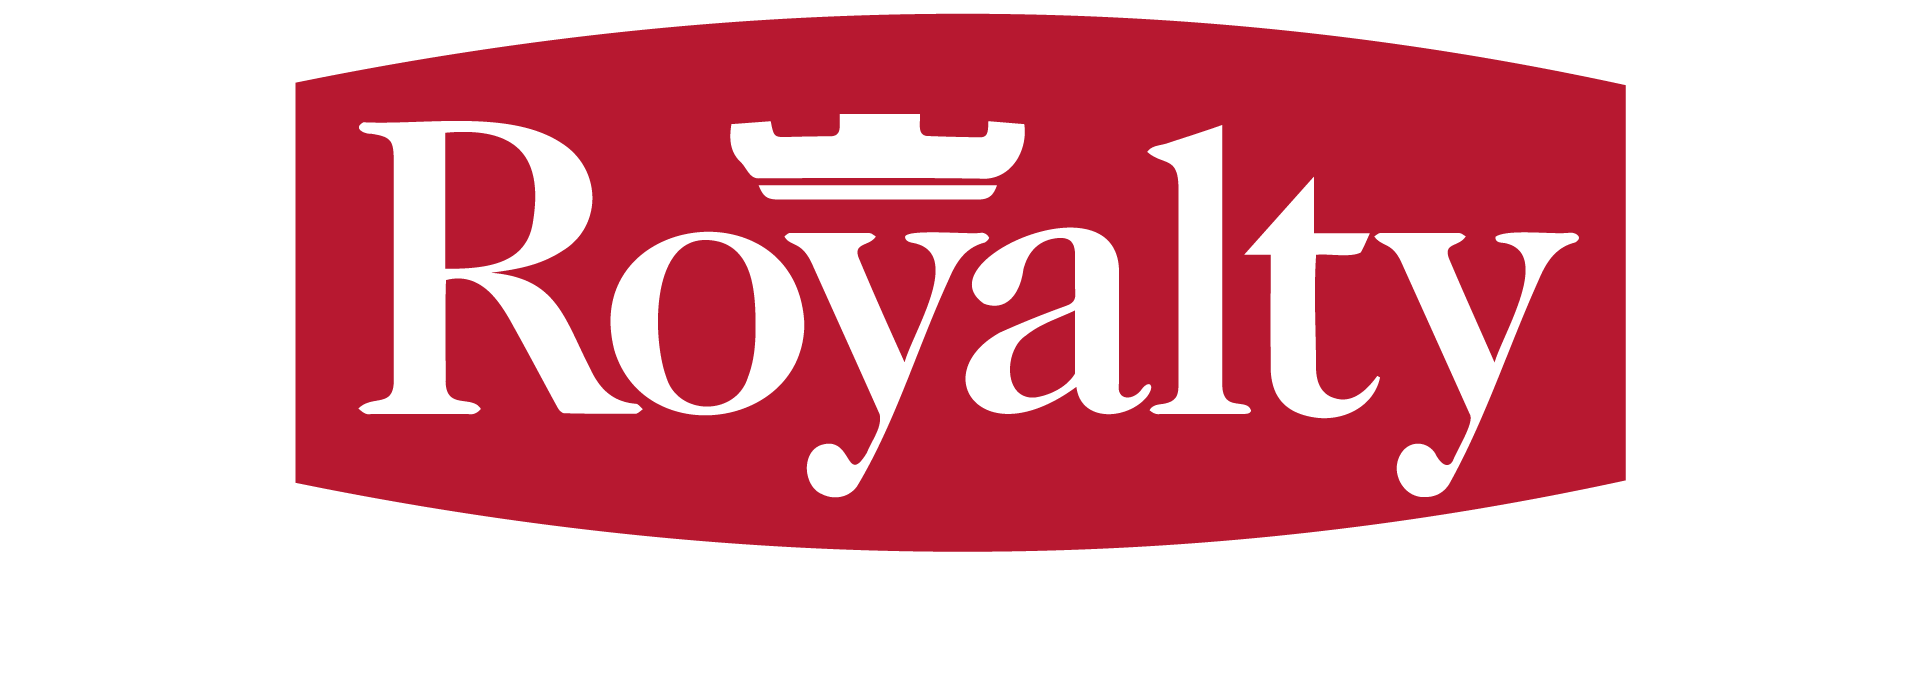 RoyaltyRoofing_logo_WHTText